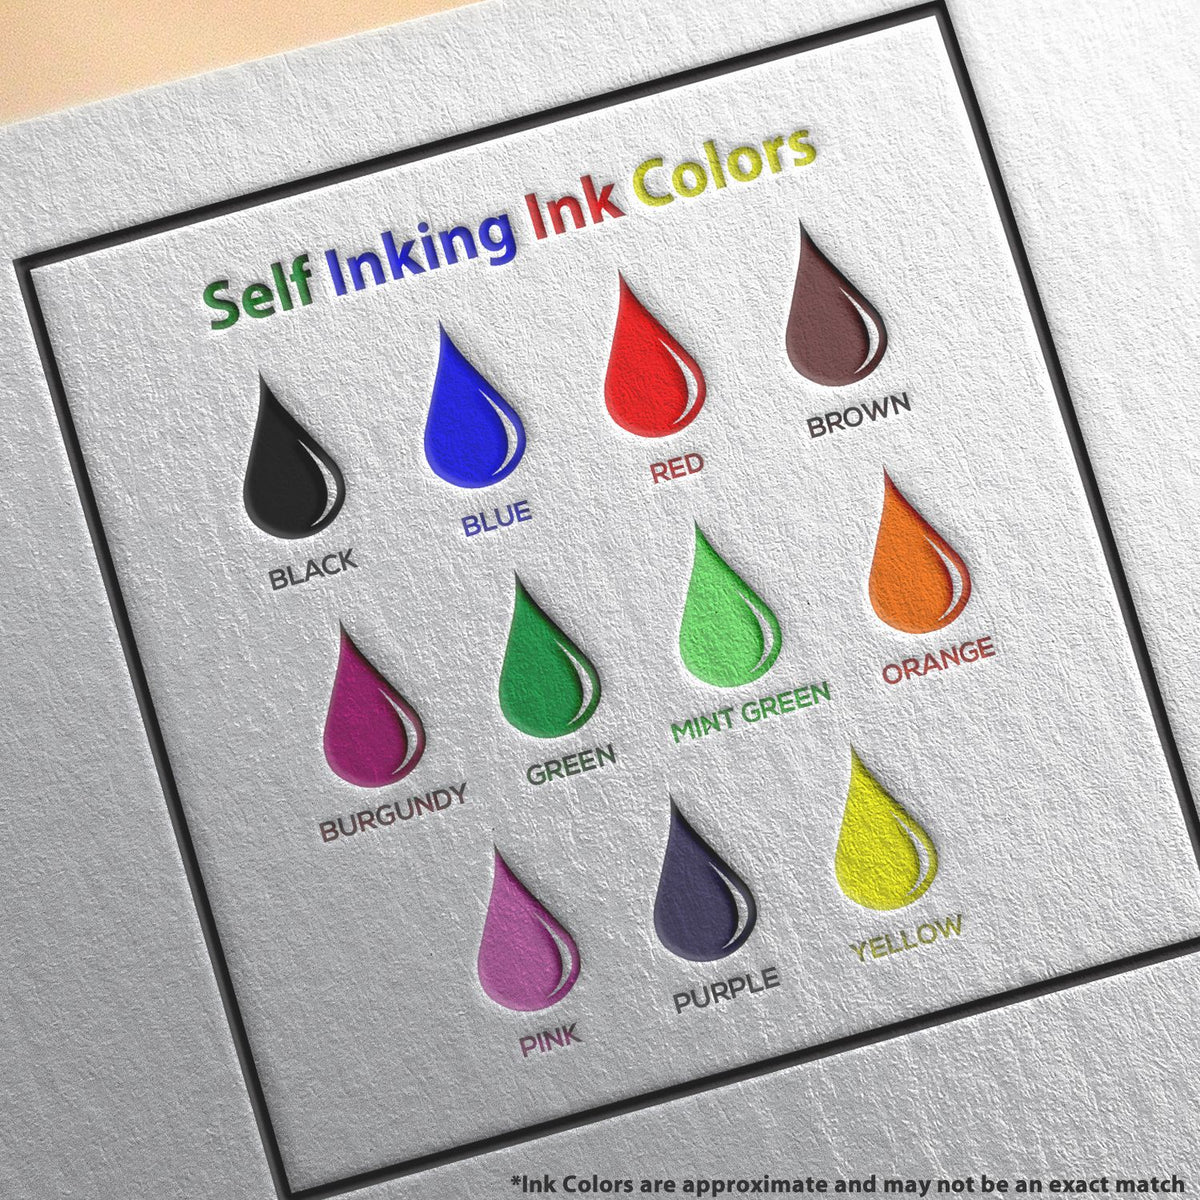 A picture showing the different ink colors or hues available for the Self-Inking Rectangular Missouri Notary Stamp product.